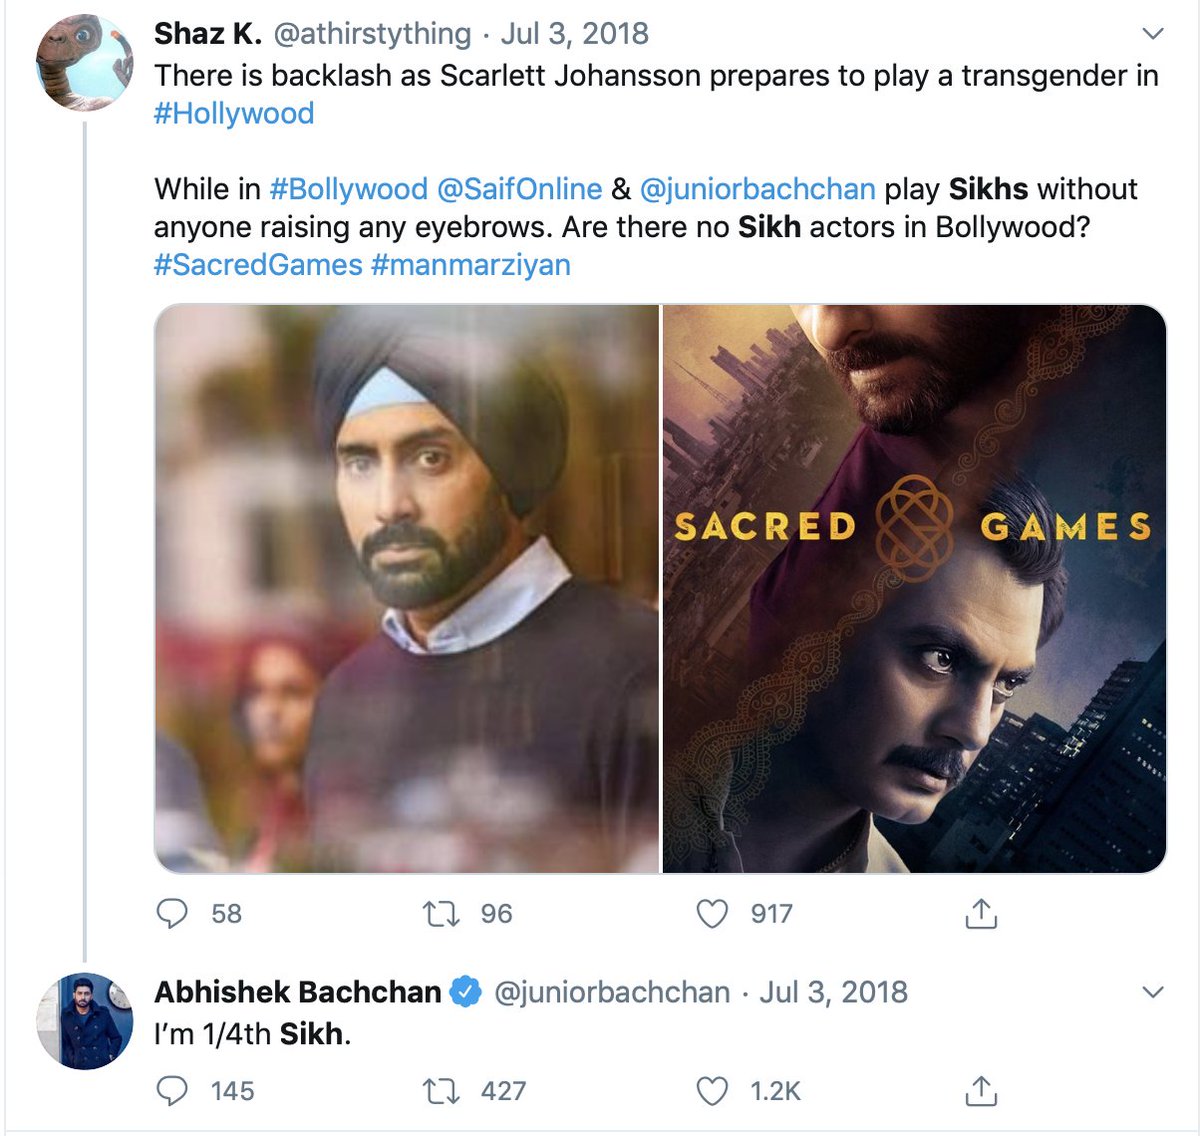 Cannot believe we are still having the absolutely absurd conversation over "Sikh is an ethnicity", but maybe this should illustrate the point - anyone who supports that view, should surely have no problem with people saying they are "1/4 Sikh", as Abhishek Bachchan did here?  https://twitter.com/OfficialJassa/status/1278253746028531714